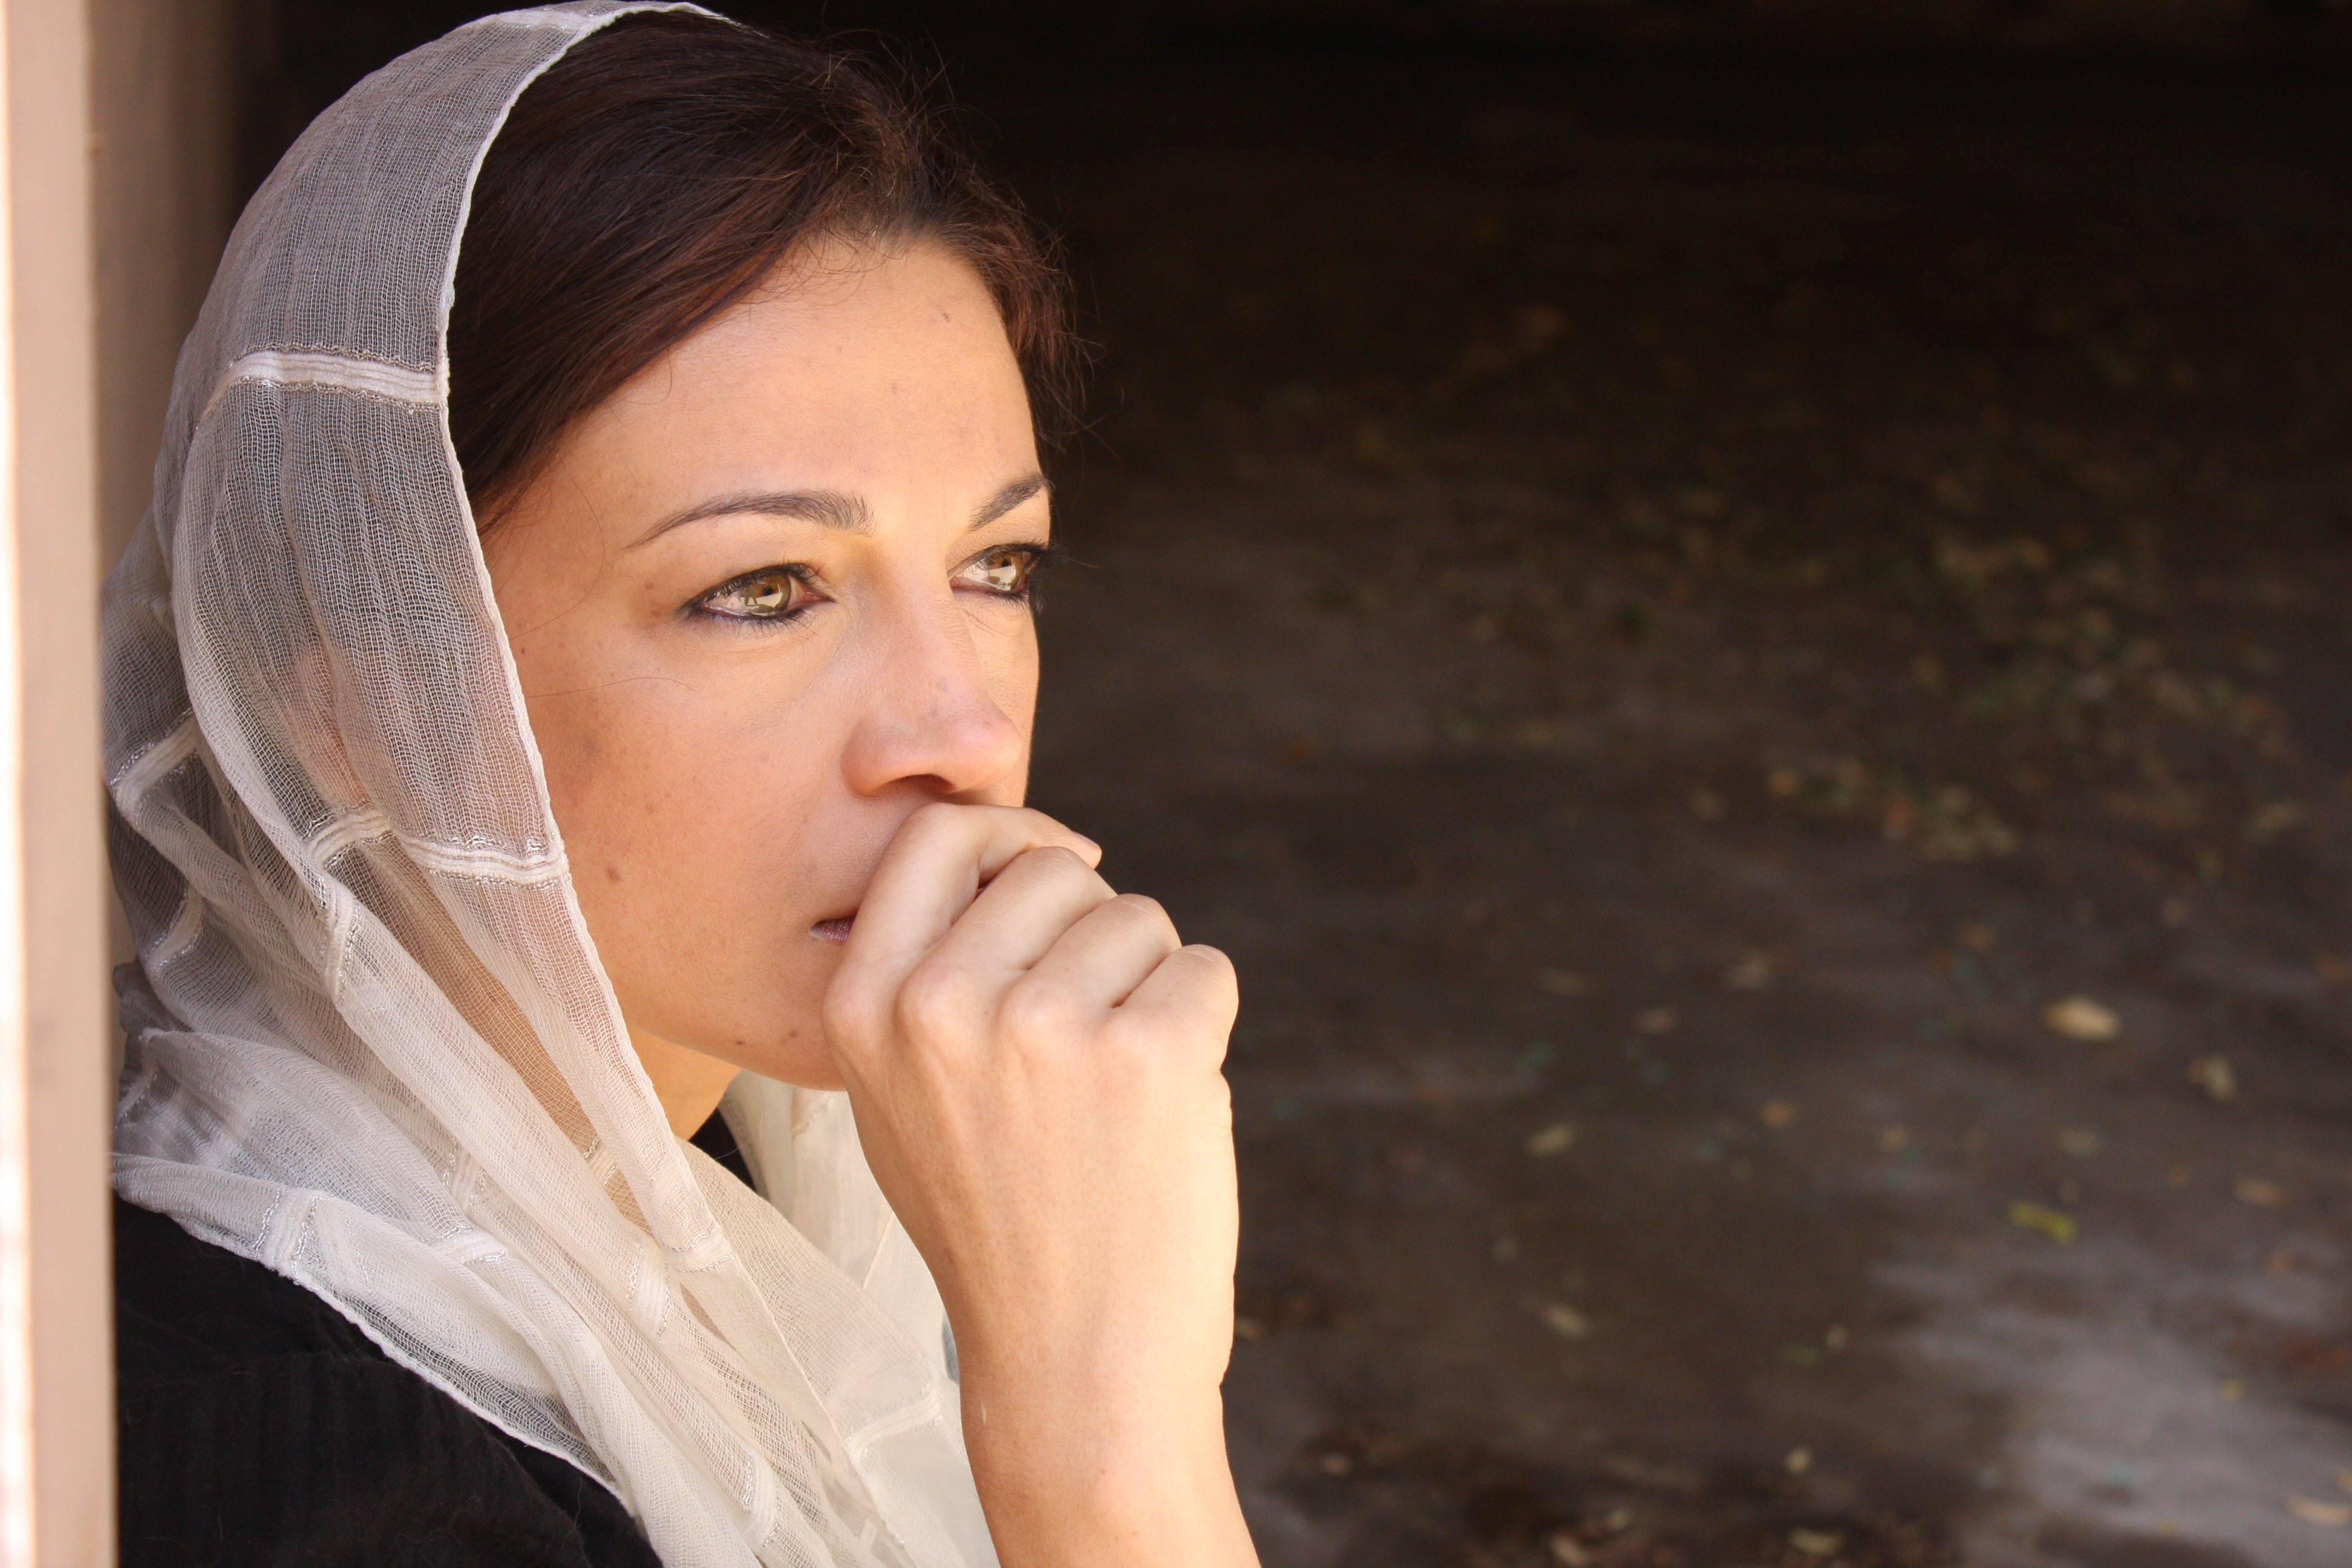 As Benazir Bhutto in SHAHEED: The Dream and Death of Benazir Bhutto